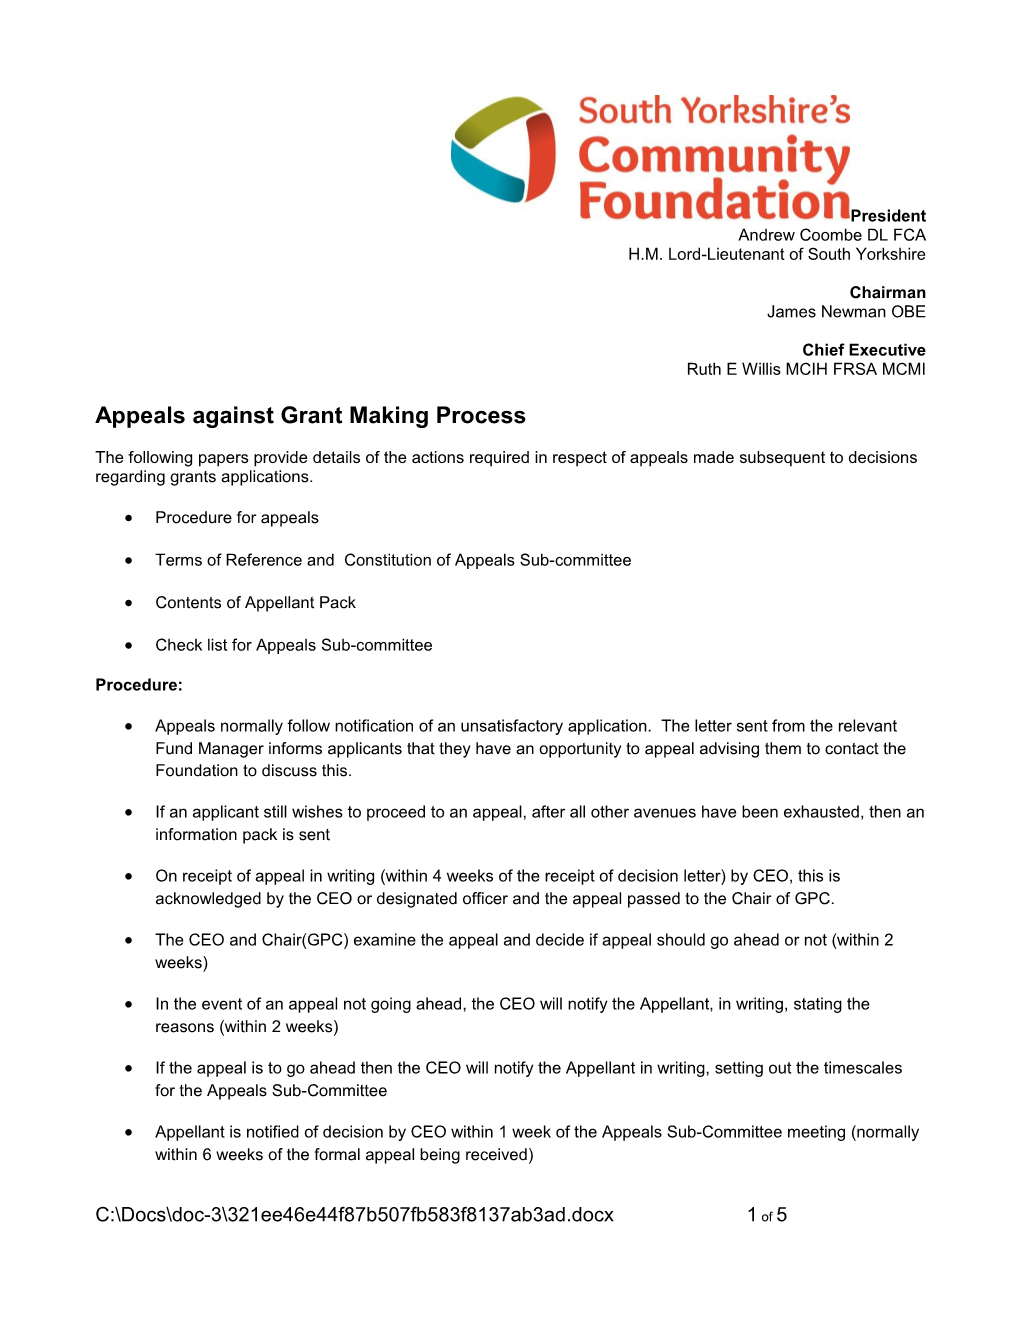 Appeals Against Grant Making Process